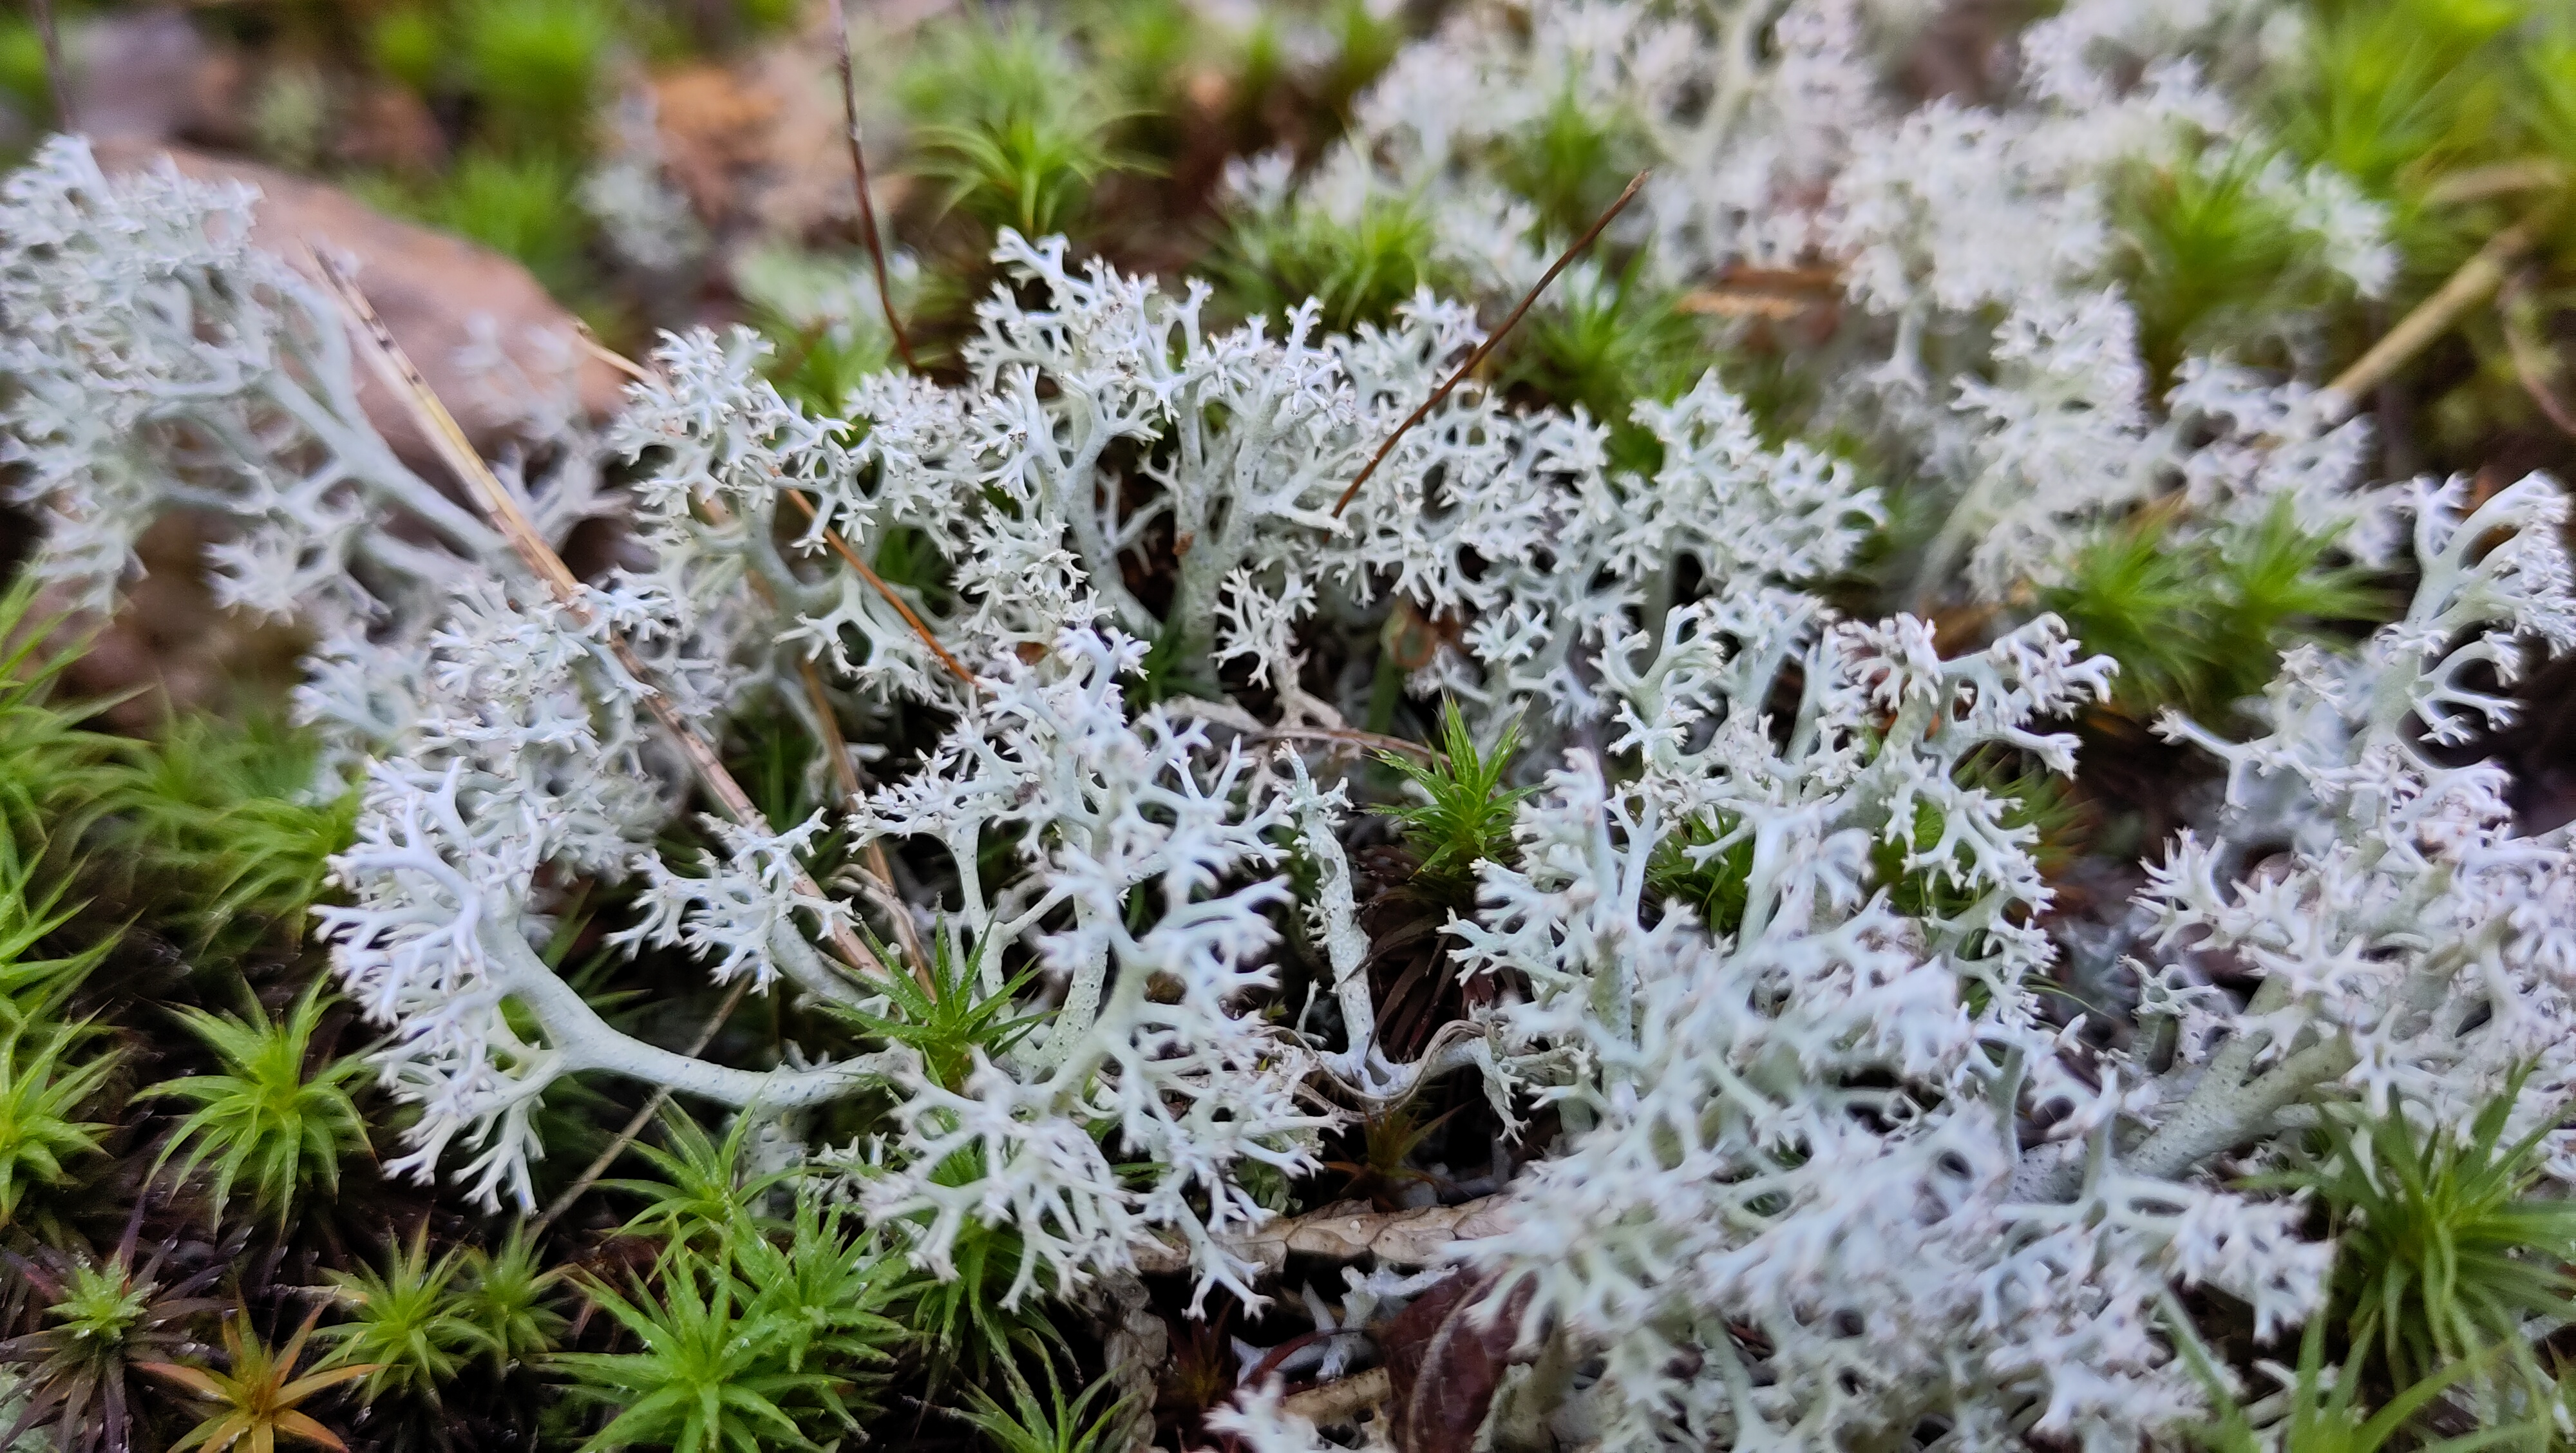 Close-up photo of grey, branching reindeer lichen among som mosses